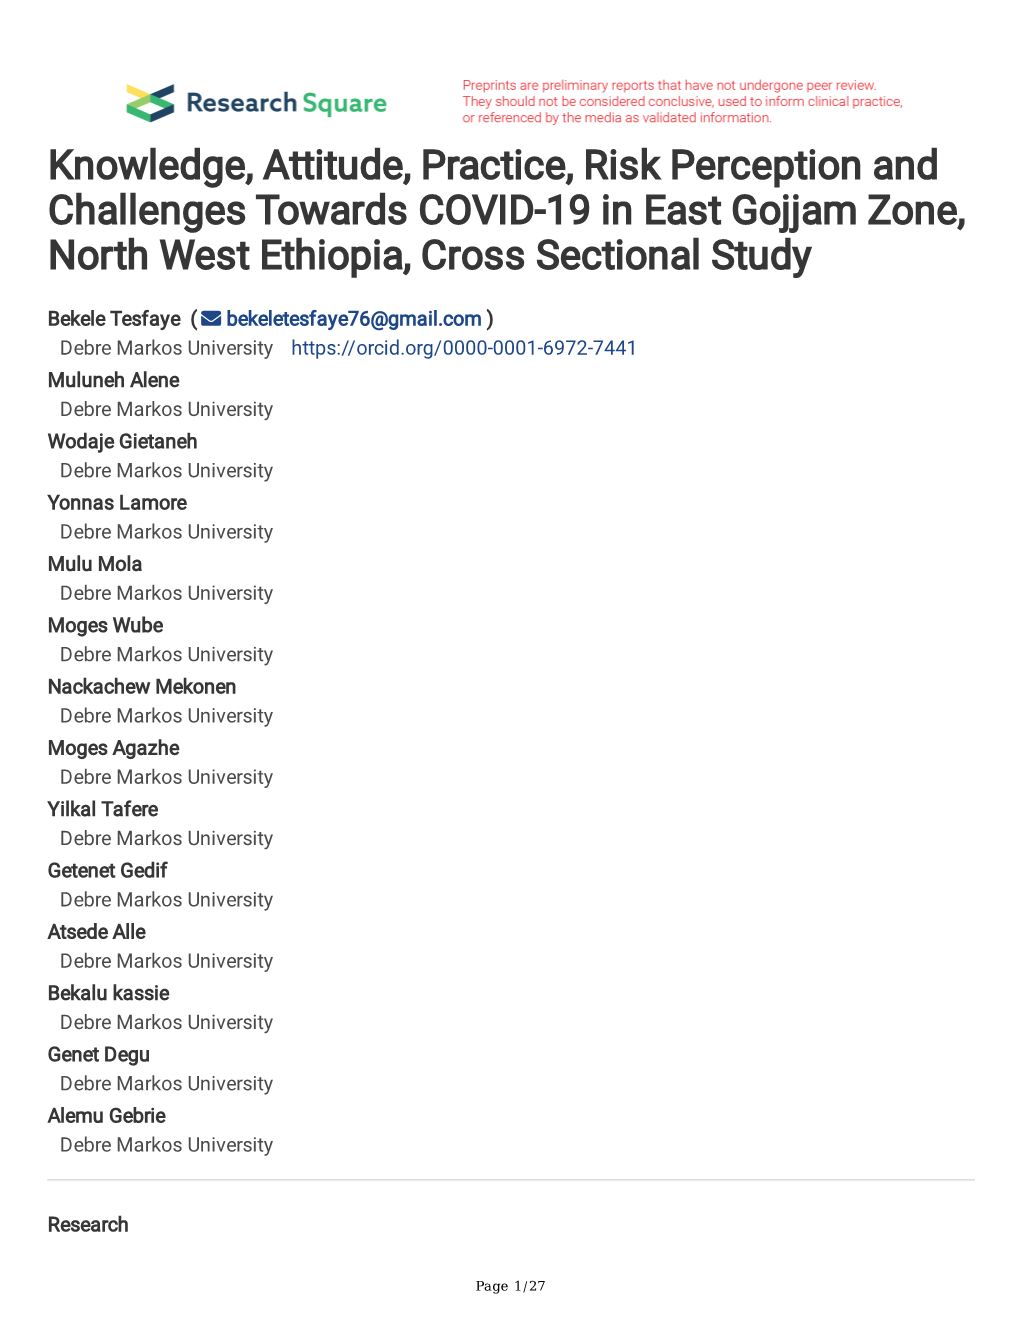 Knowledge, Attitude, Practice, Risk Perception and Challenges Towards COVID-19 in East Gojjam Zone, North West Ethiopia, Cross Sectional Study